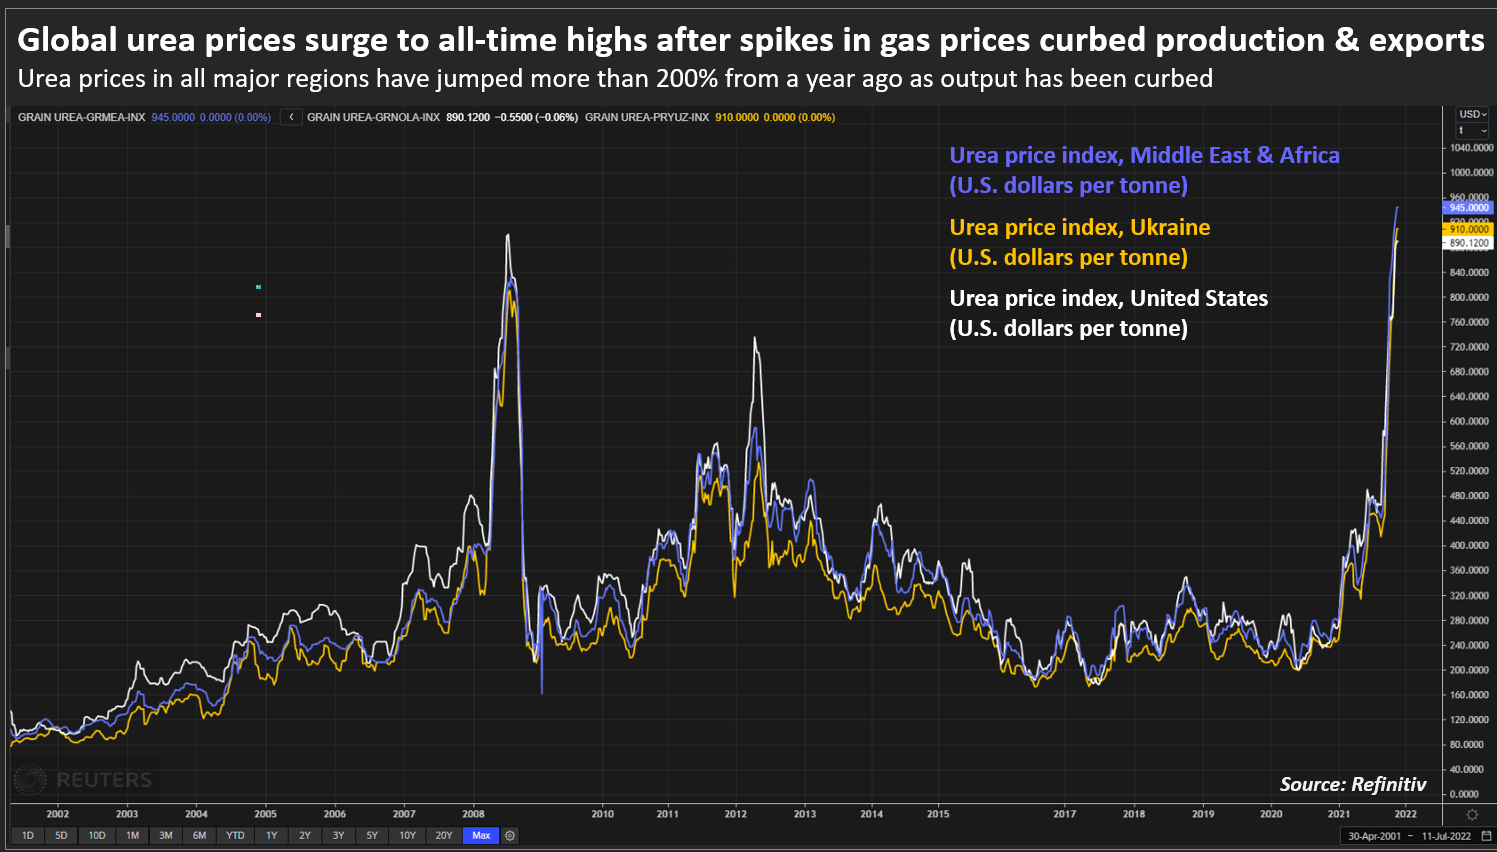 Global urea prices surge to all-time highs after spikes in gas prices curbed production & exports